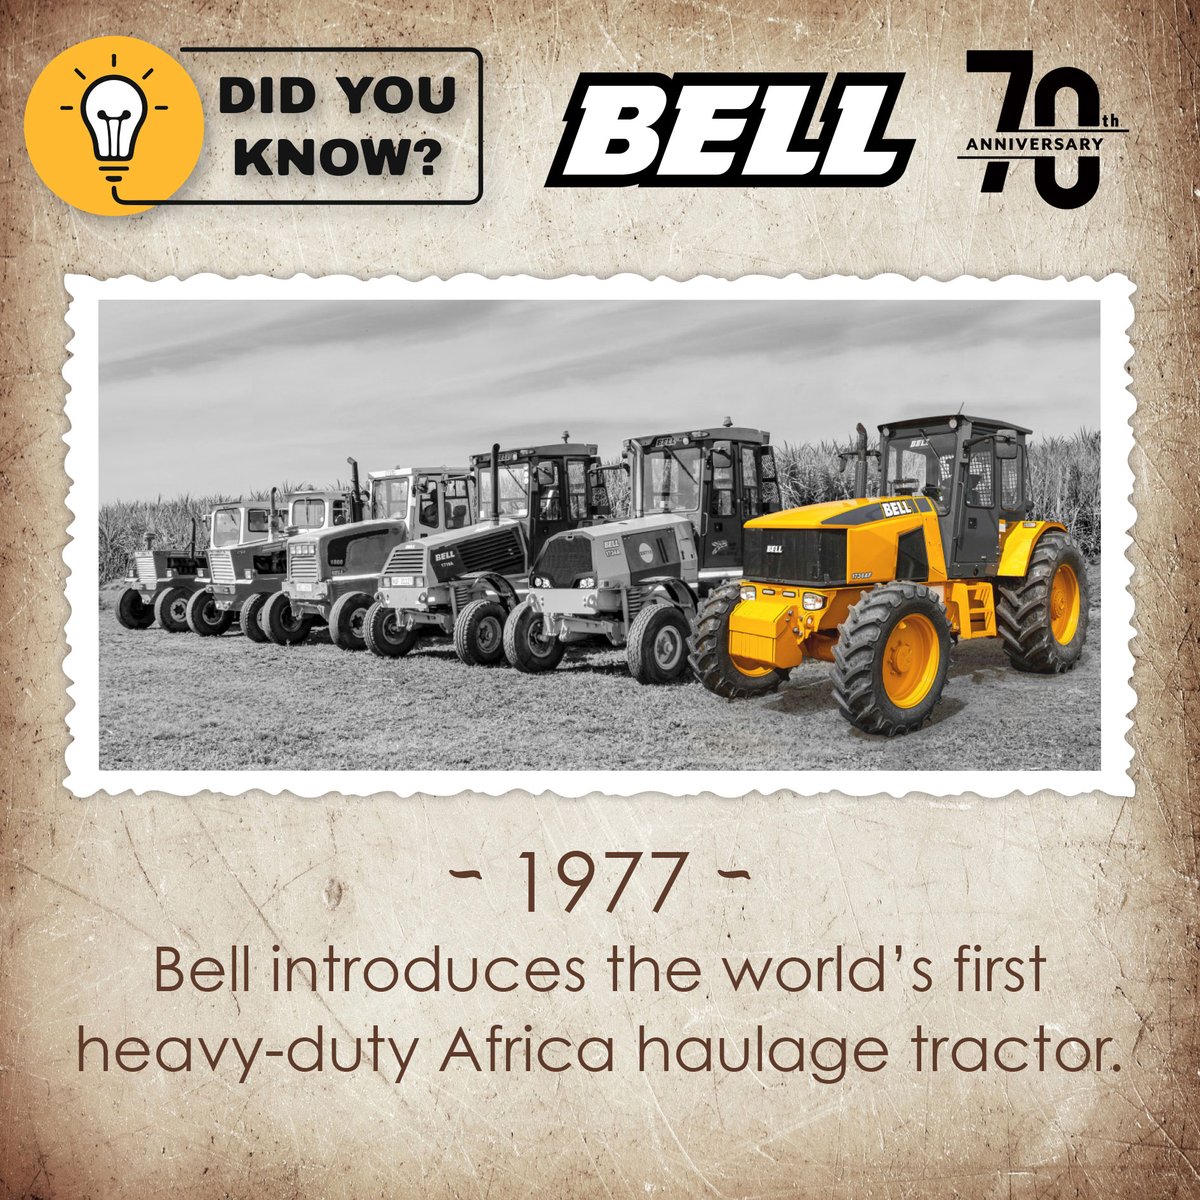 Visit Bell at stand F8 at Nampo 2024 to see the Bell Series V Haulage Tractor. Building on the company’s solid haulage heritage, the Series V range delivers the best performance, productivity, & safety benefits, & ultimately lowest cost per tonne. #bellequipment  #nampo2024